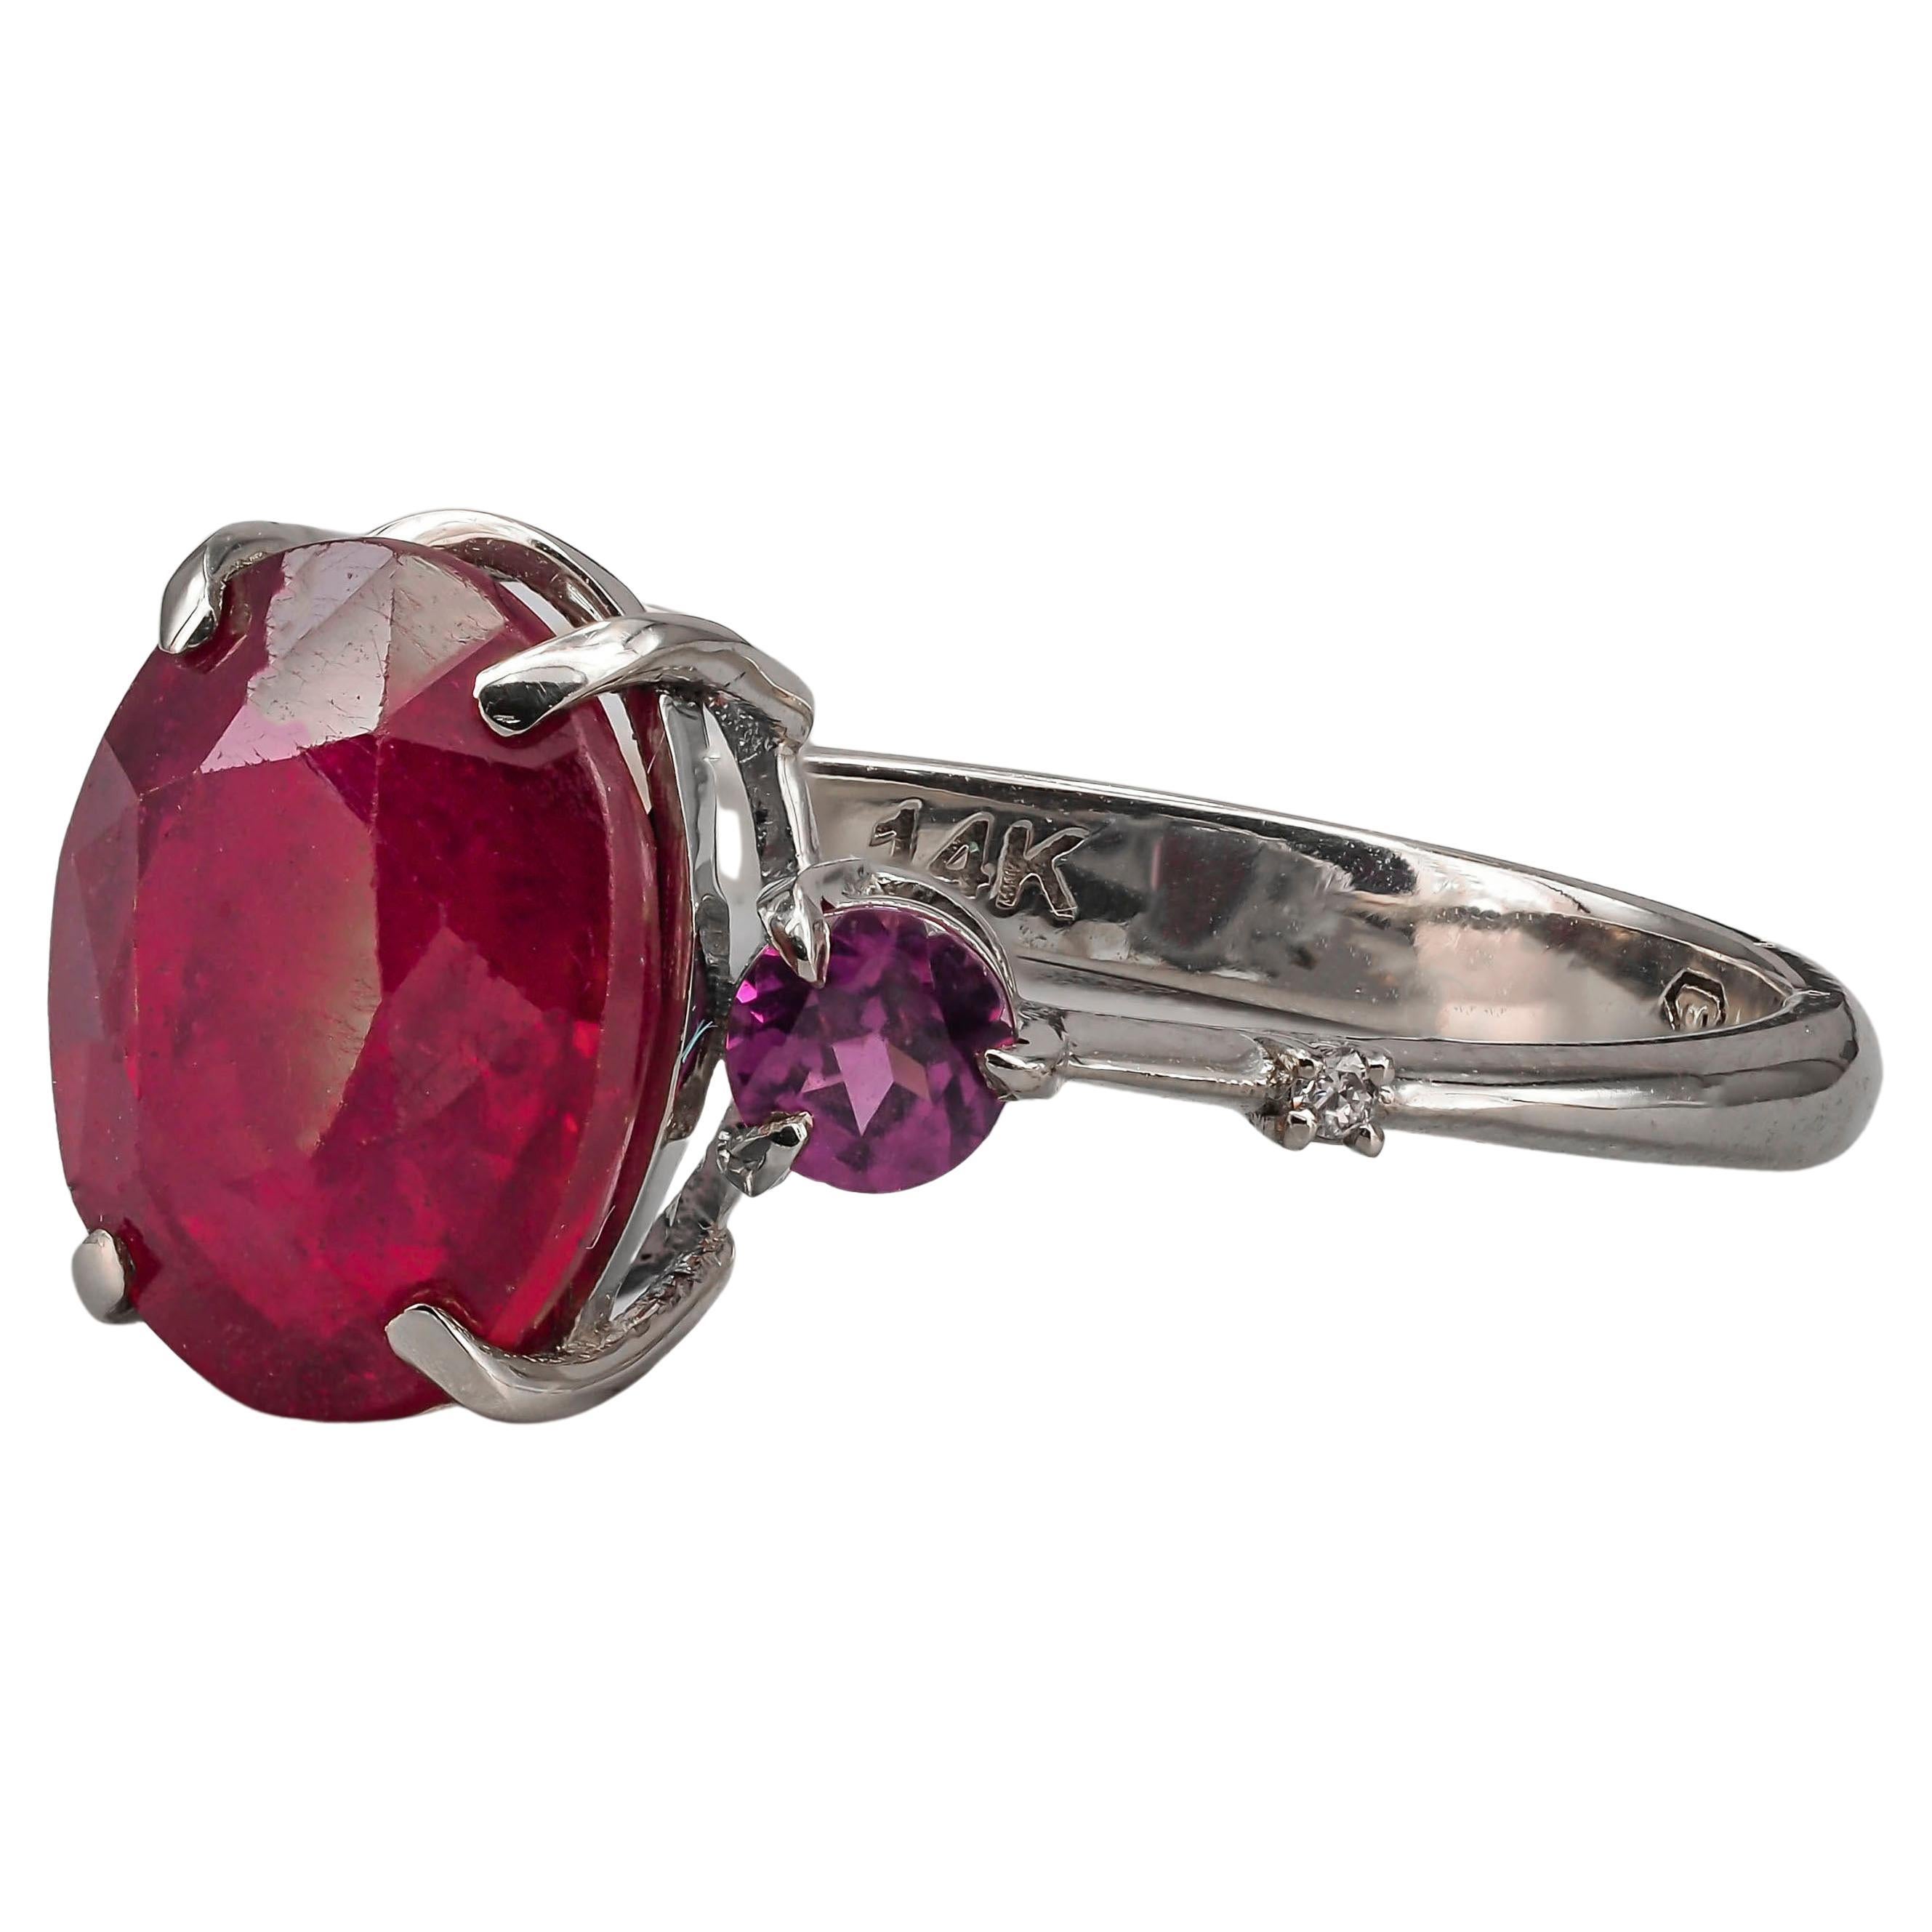 For Sale:  Ruby ring in 14k gold. Oval ruby ring. Solitaire ring with ruby.  2